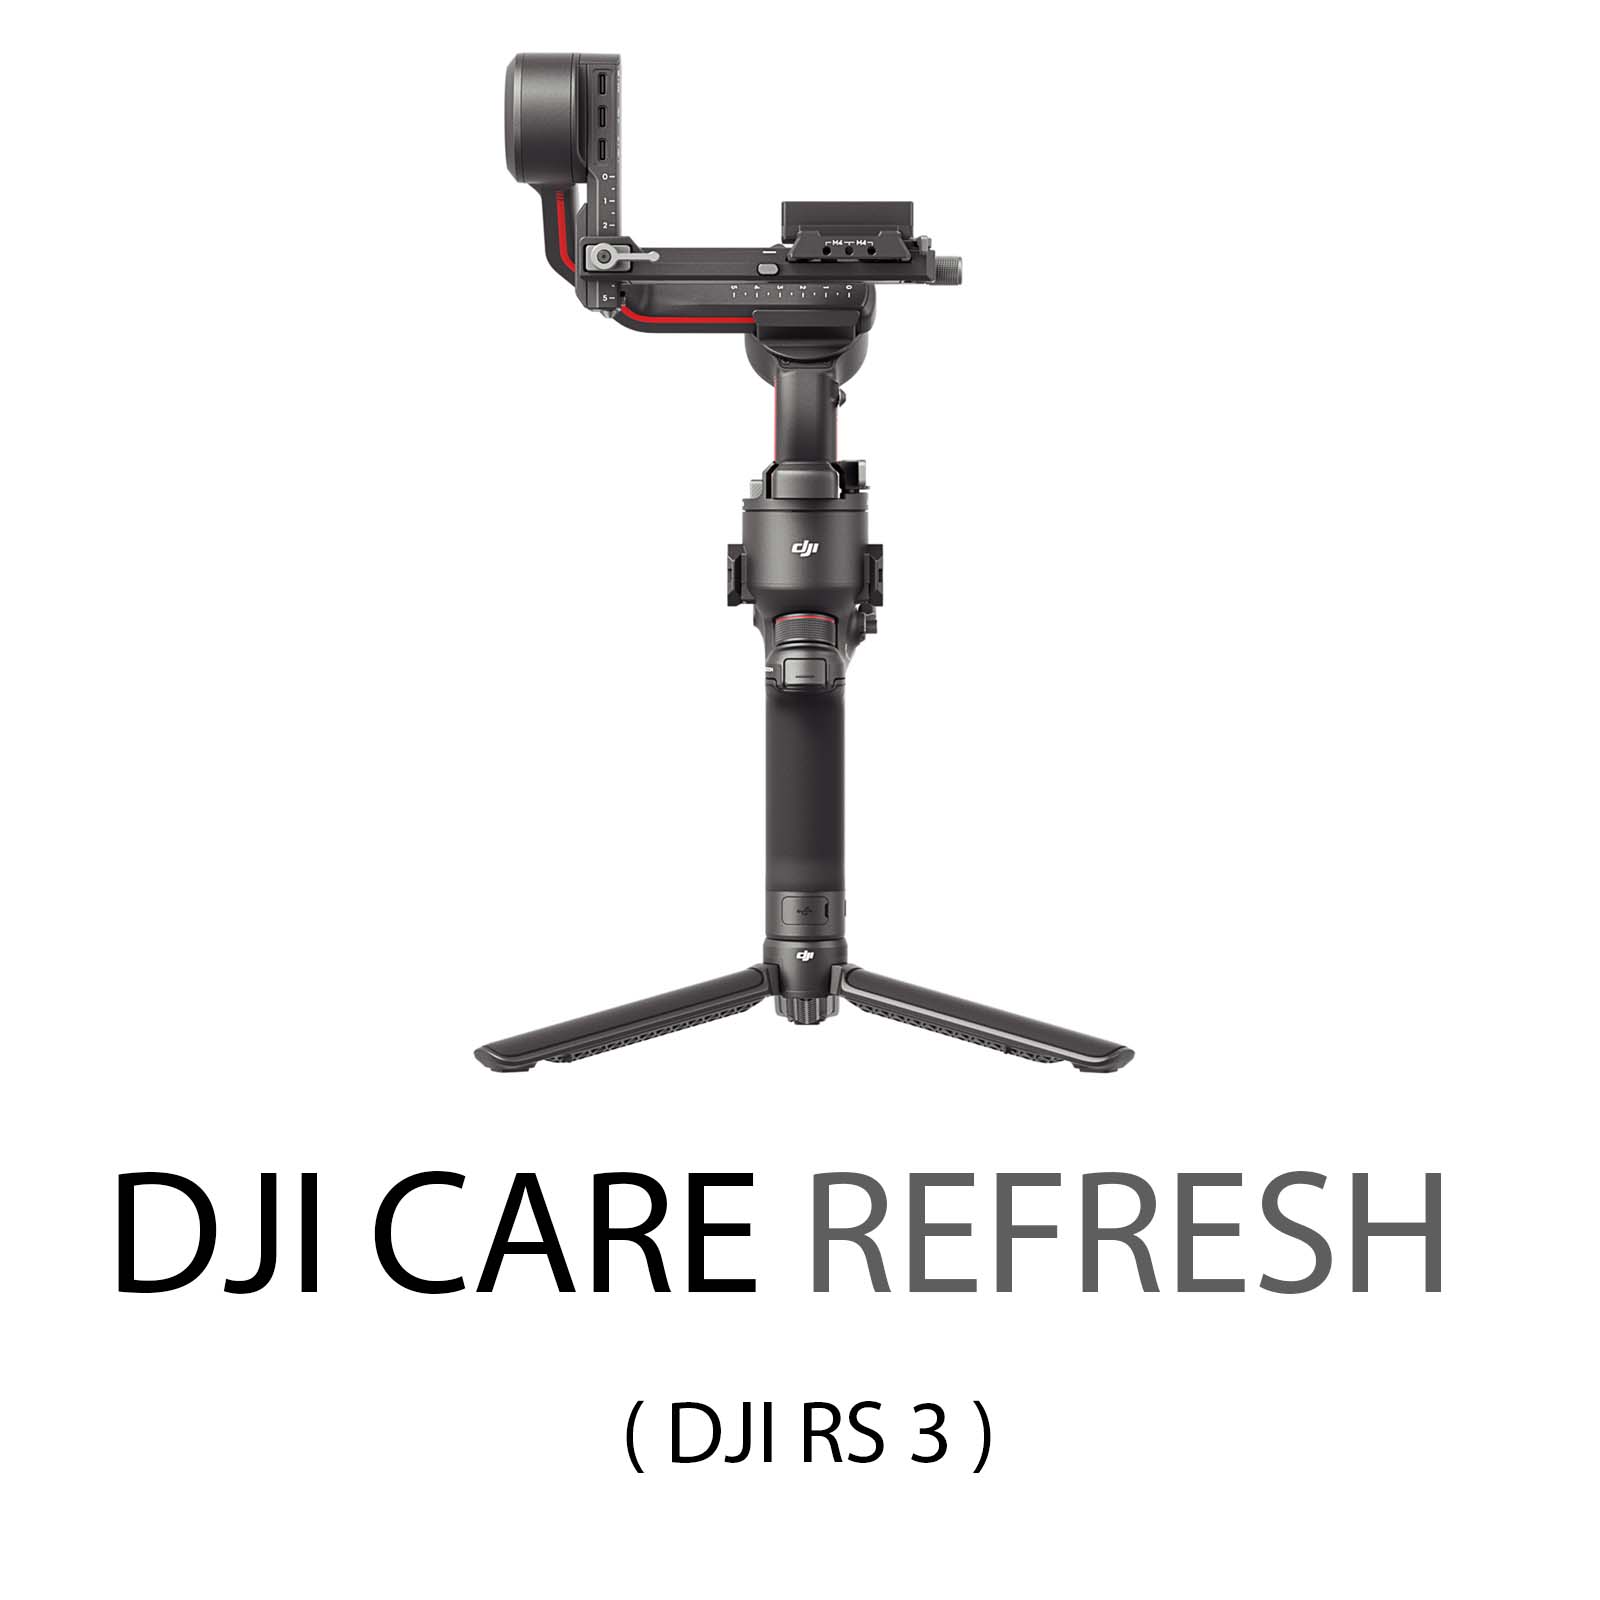 Image of DJI RS 3 Care Refresh Code (2Y)